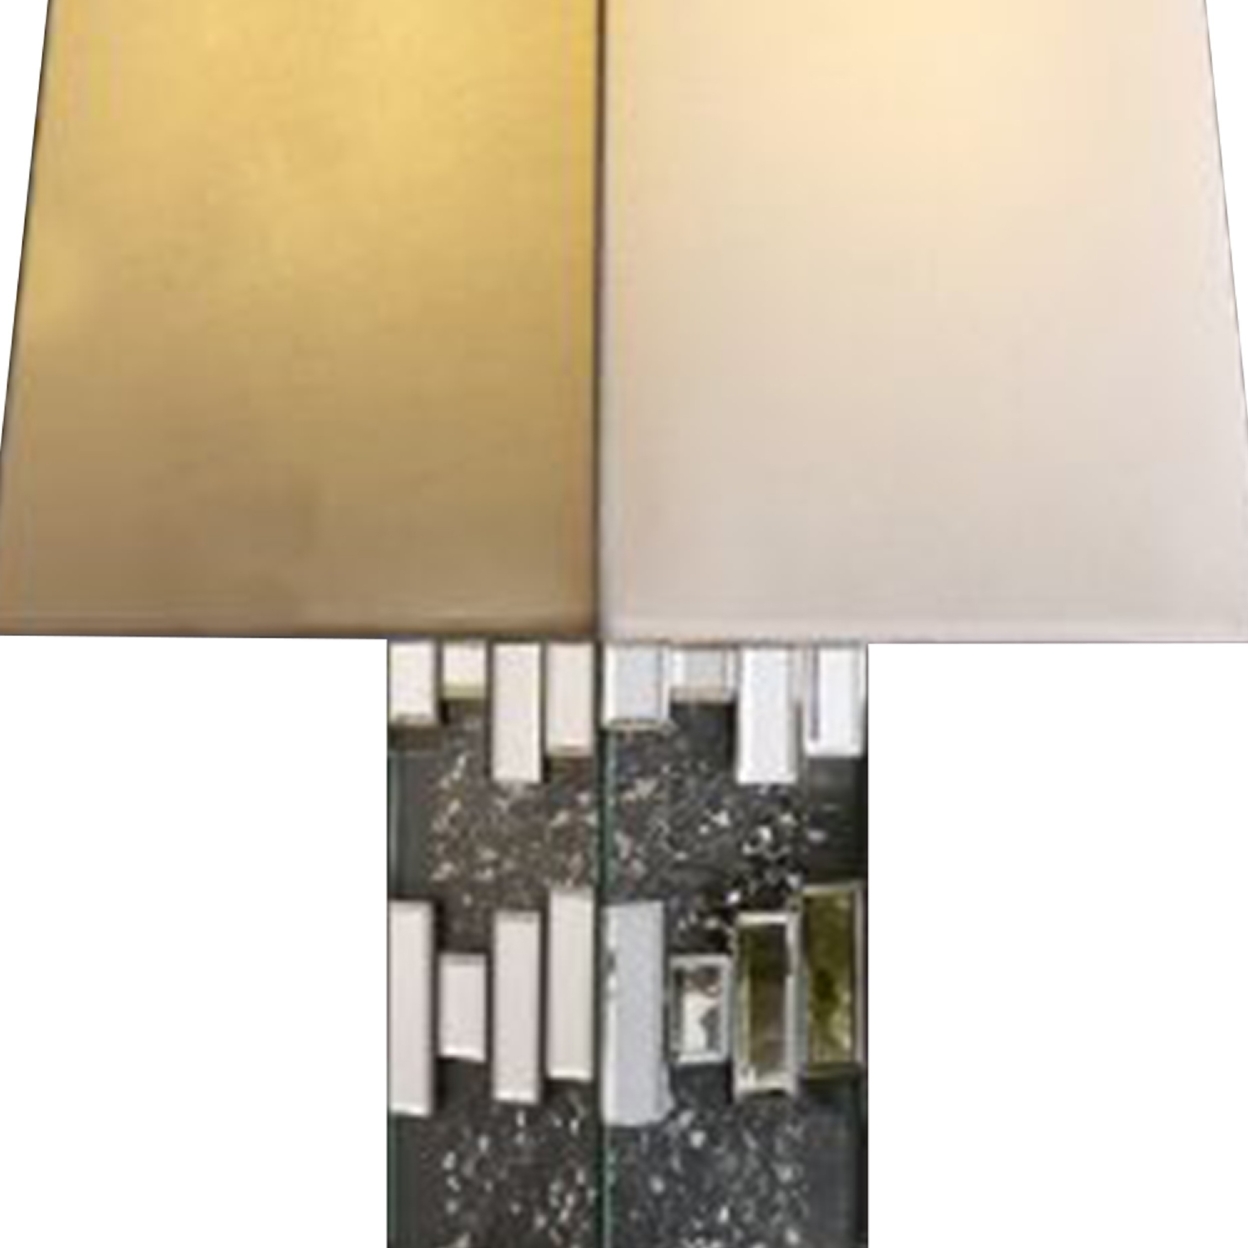 Table Lamp With Cuboid Shape And Mirrored Trim, Silver- Saltoro Sherpi